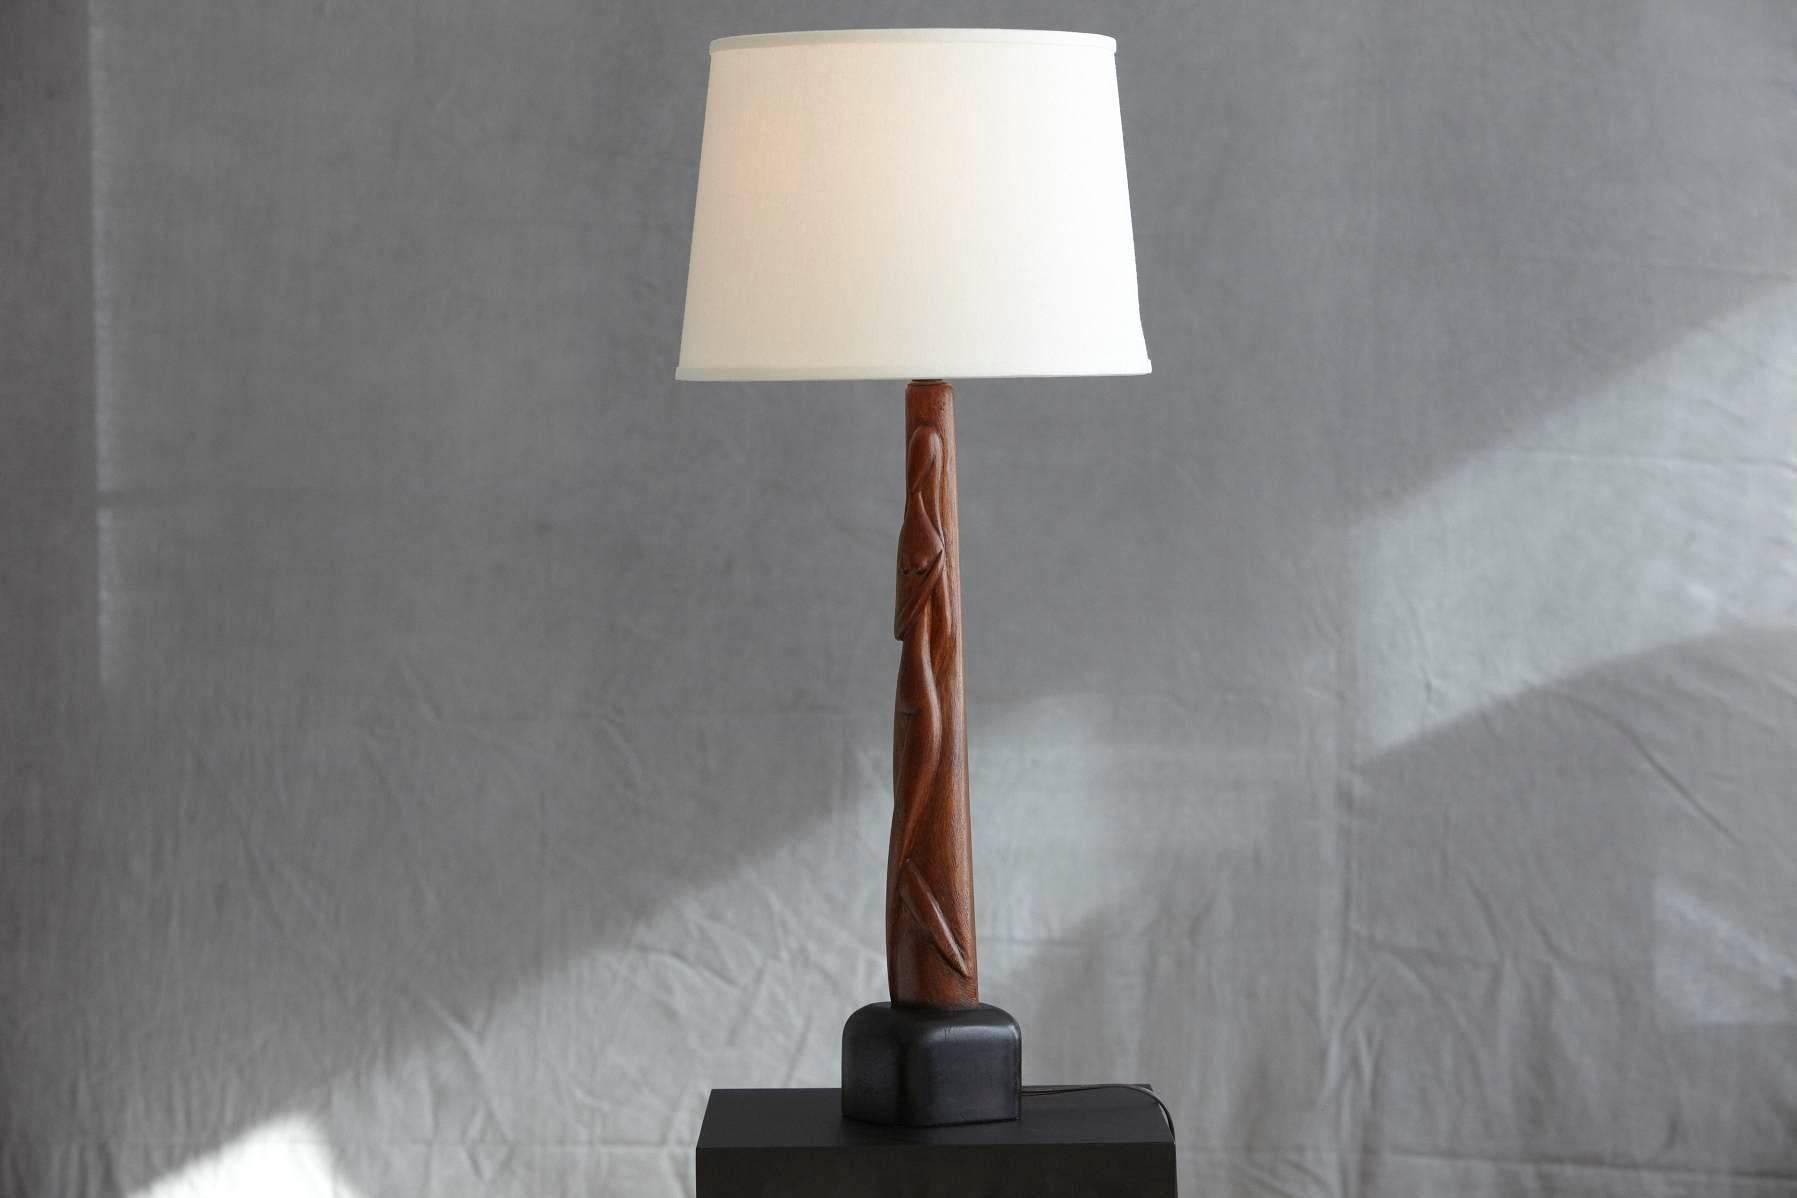 Hand-Carved Female Nude Wood Sculpture Table Lamp by Nicholas Mocharniuk For Sale 1